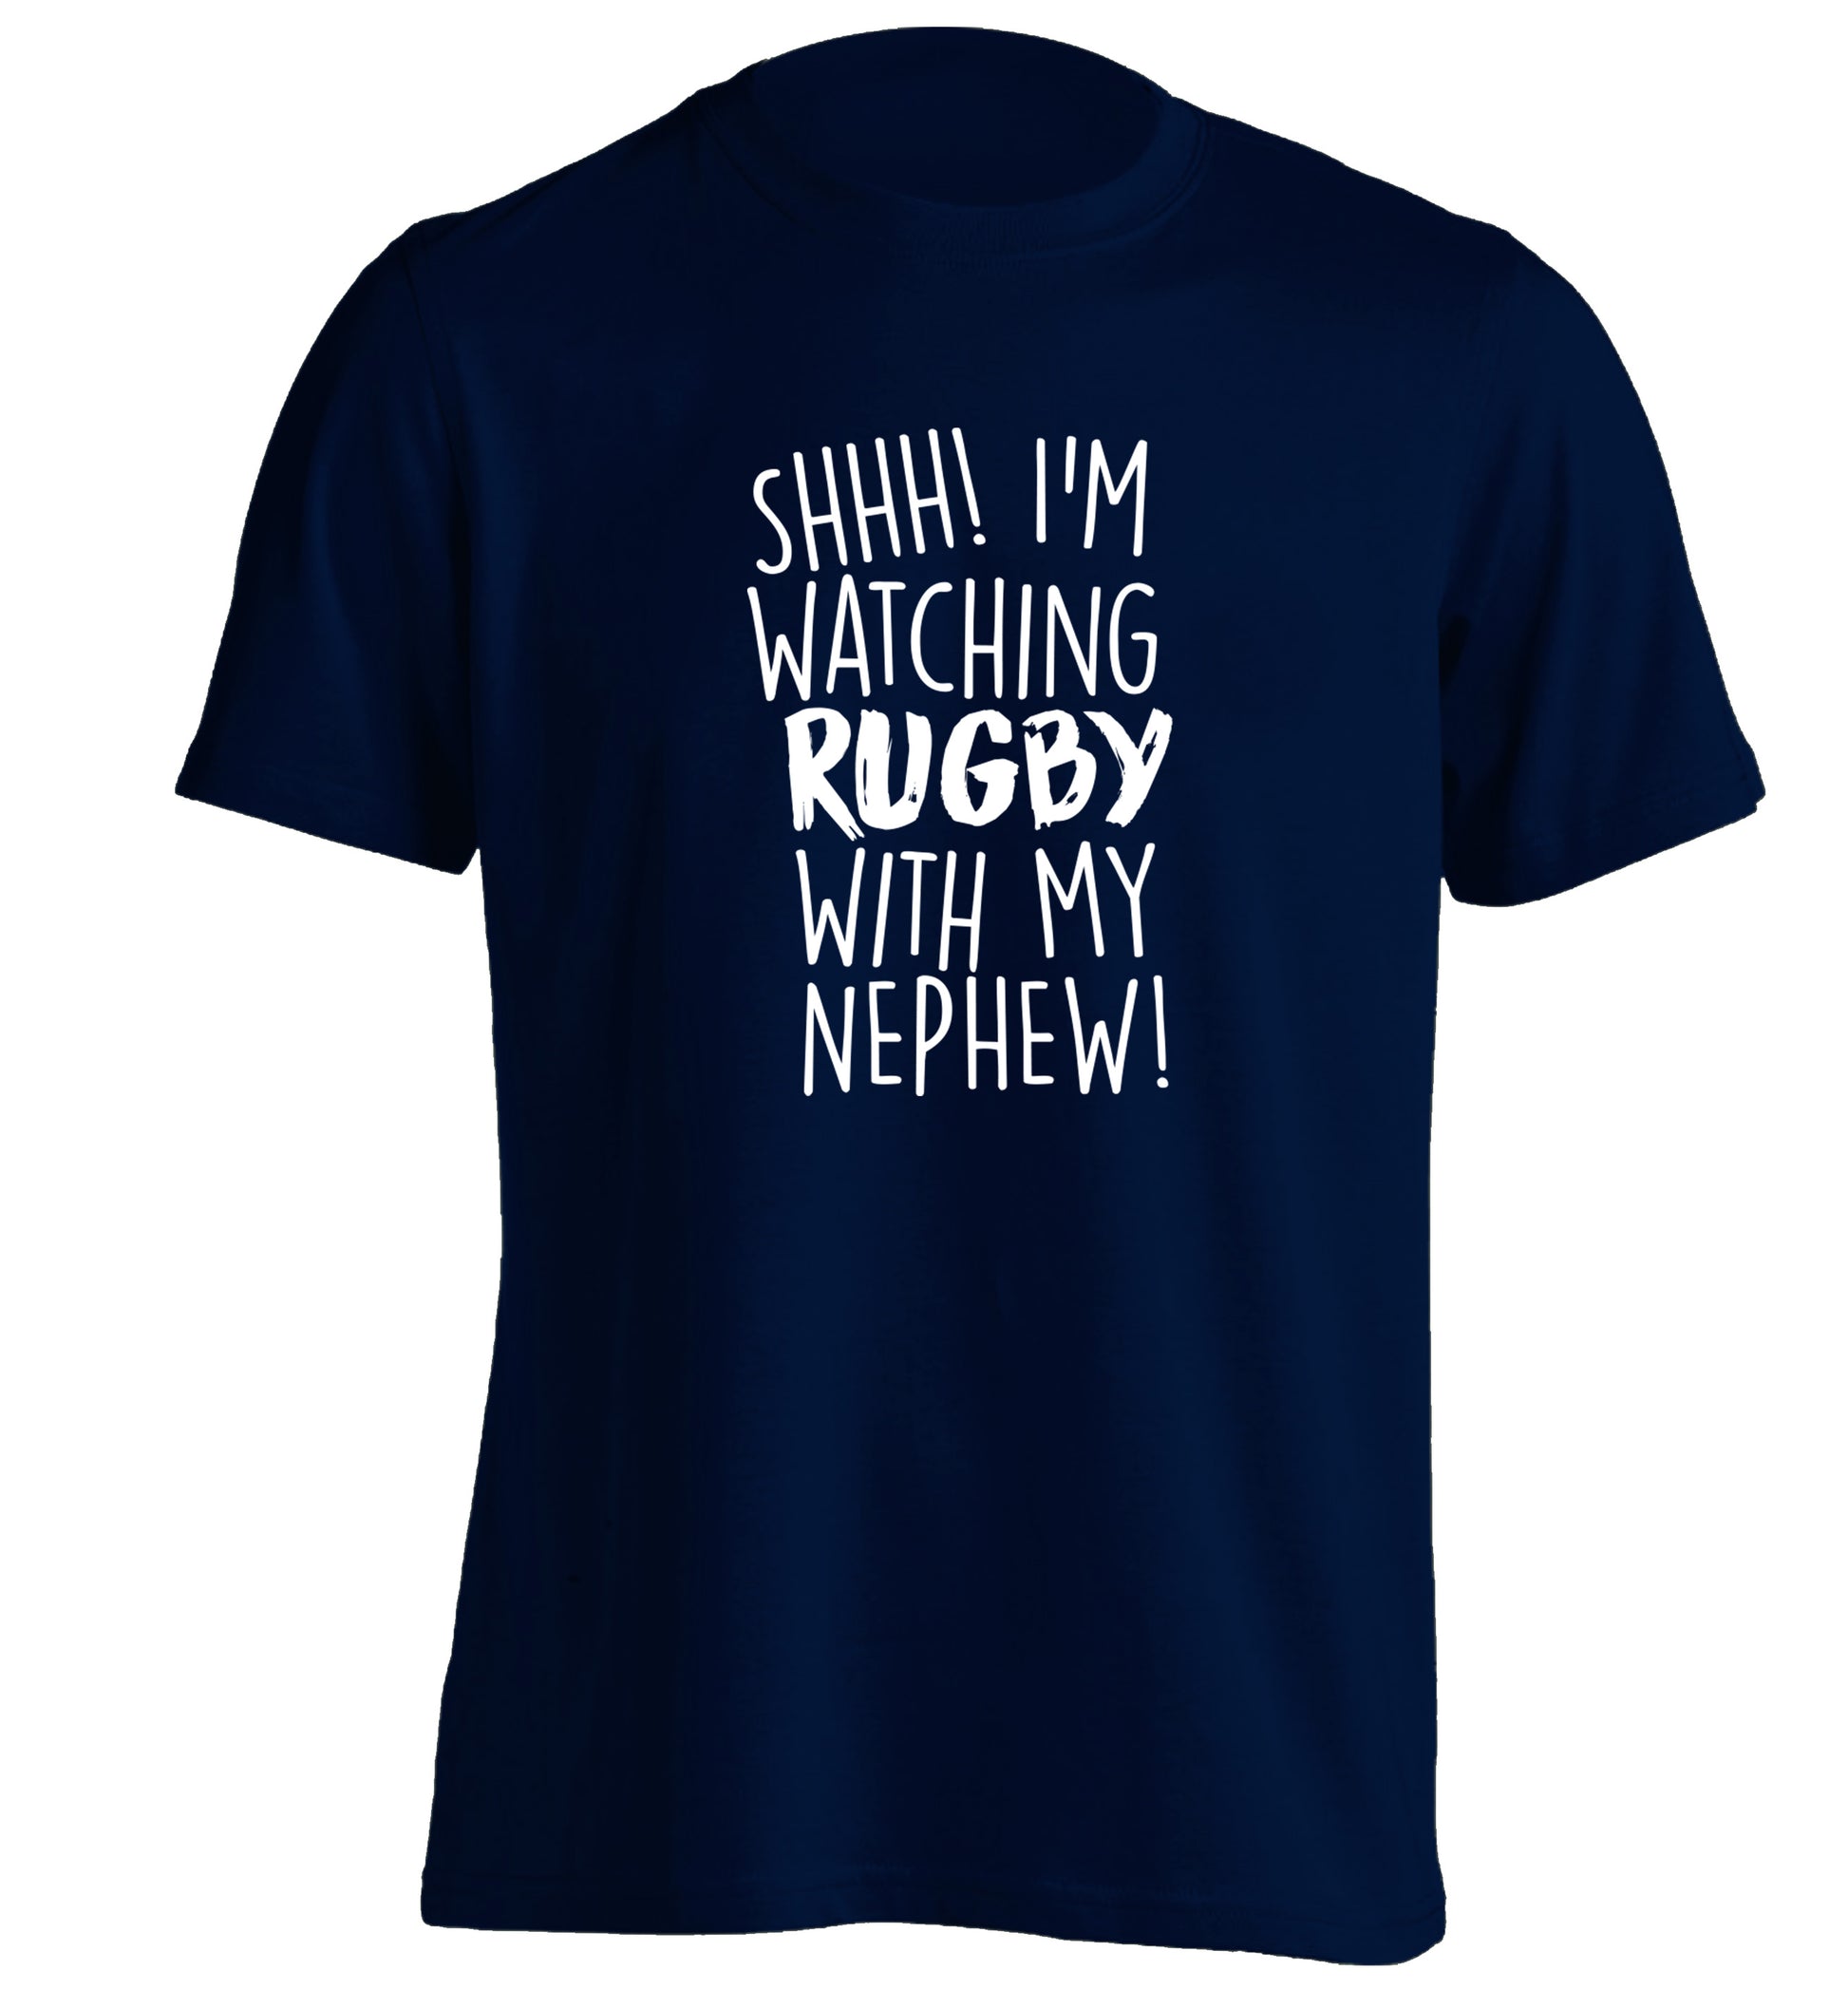 Shh.. I'm watching rugby with my nephew adults unisex navy Tshirt 2XL